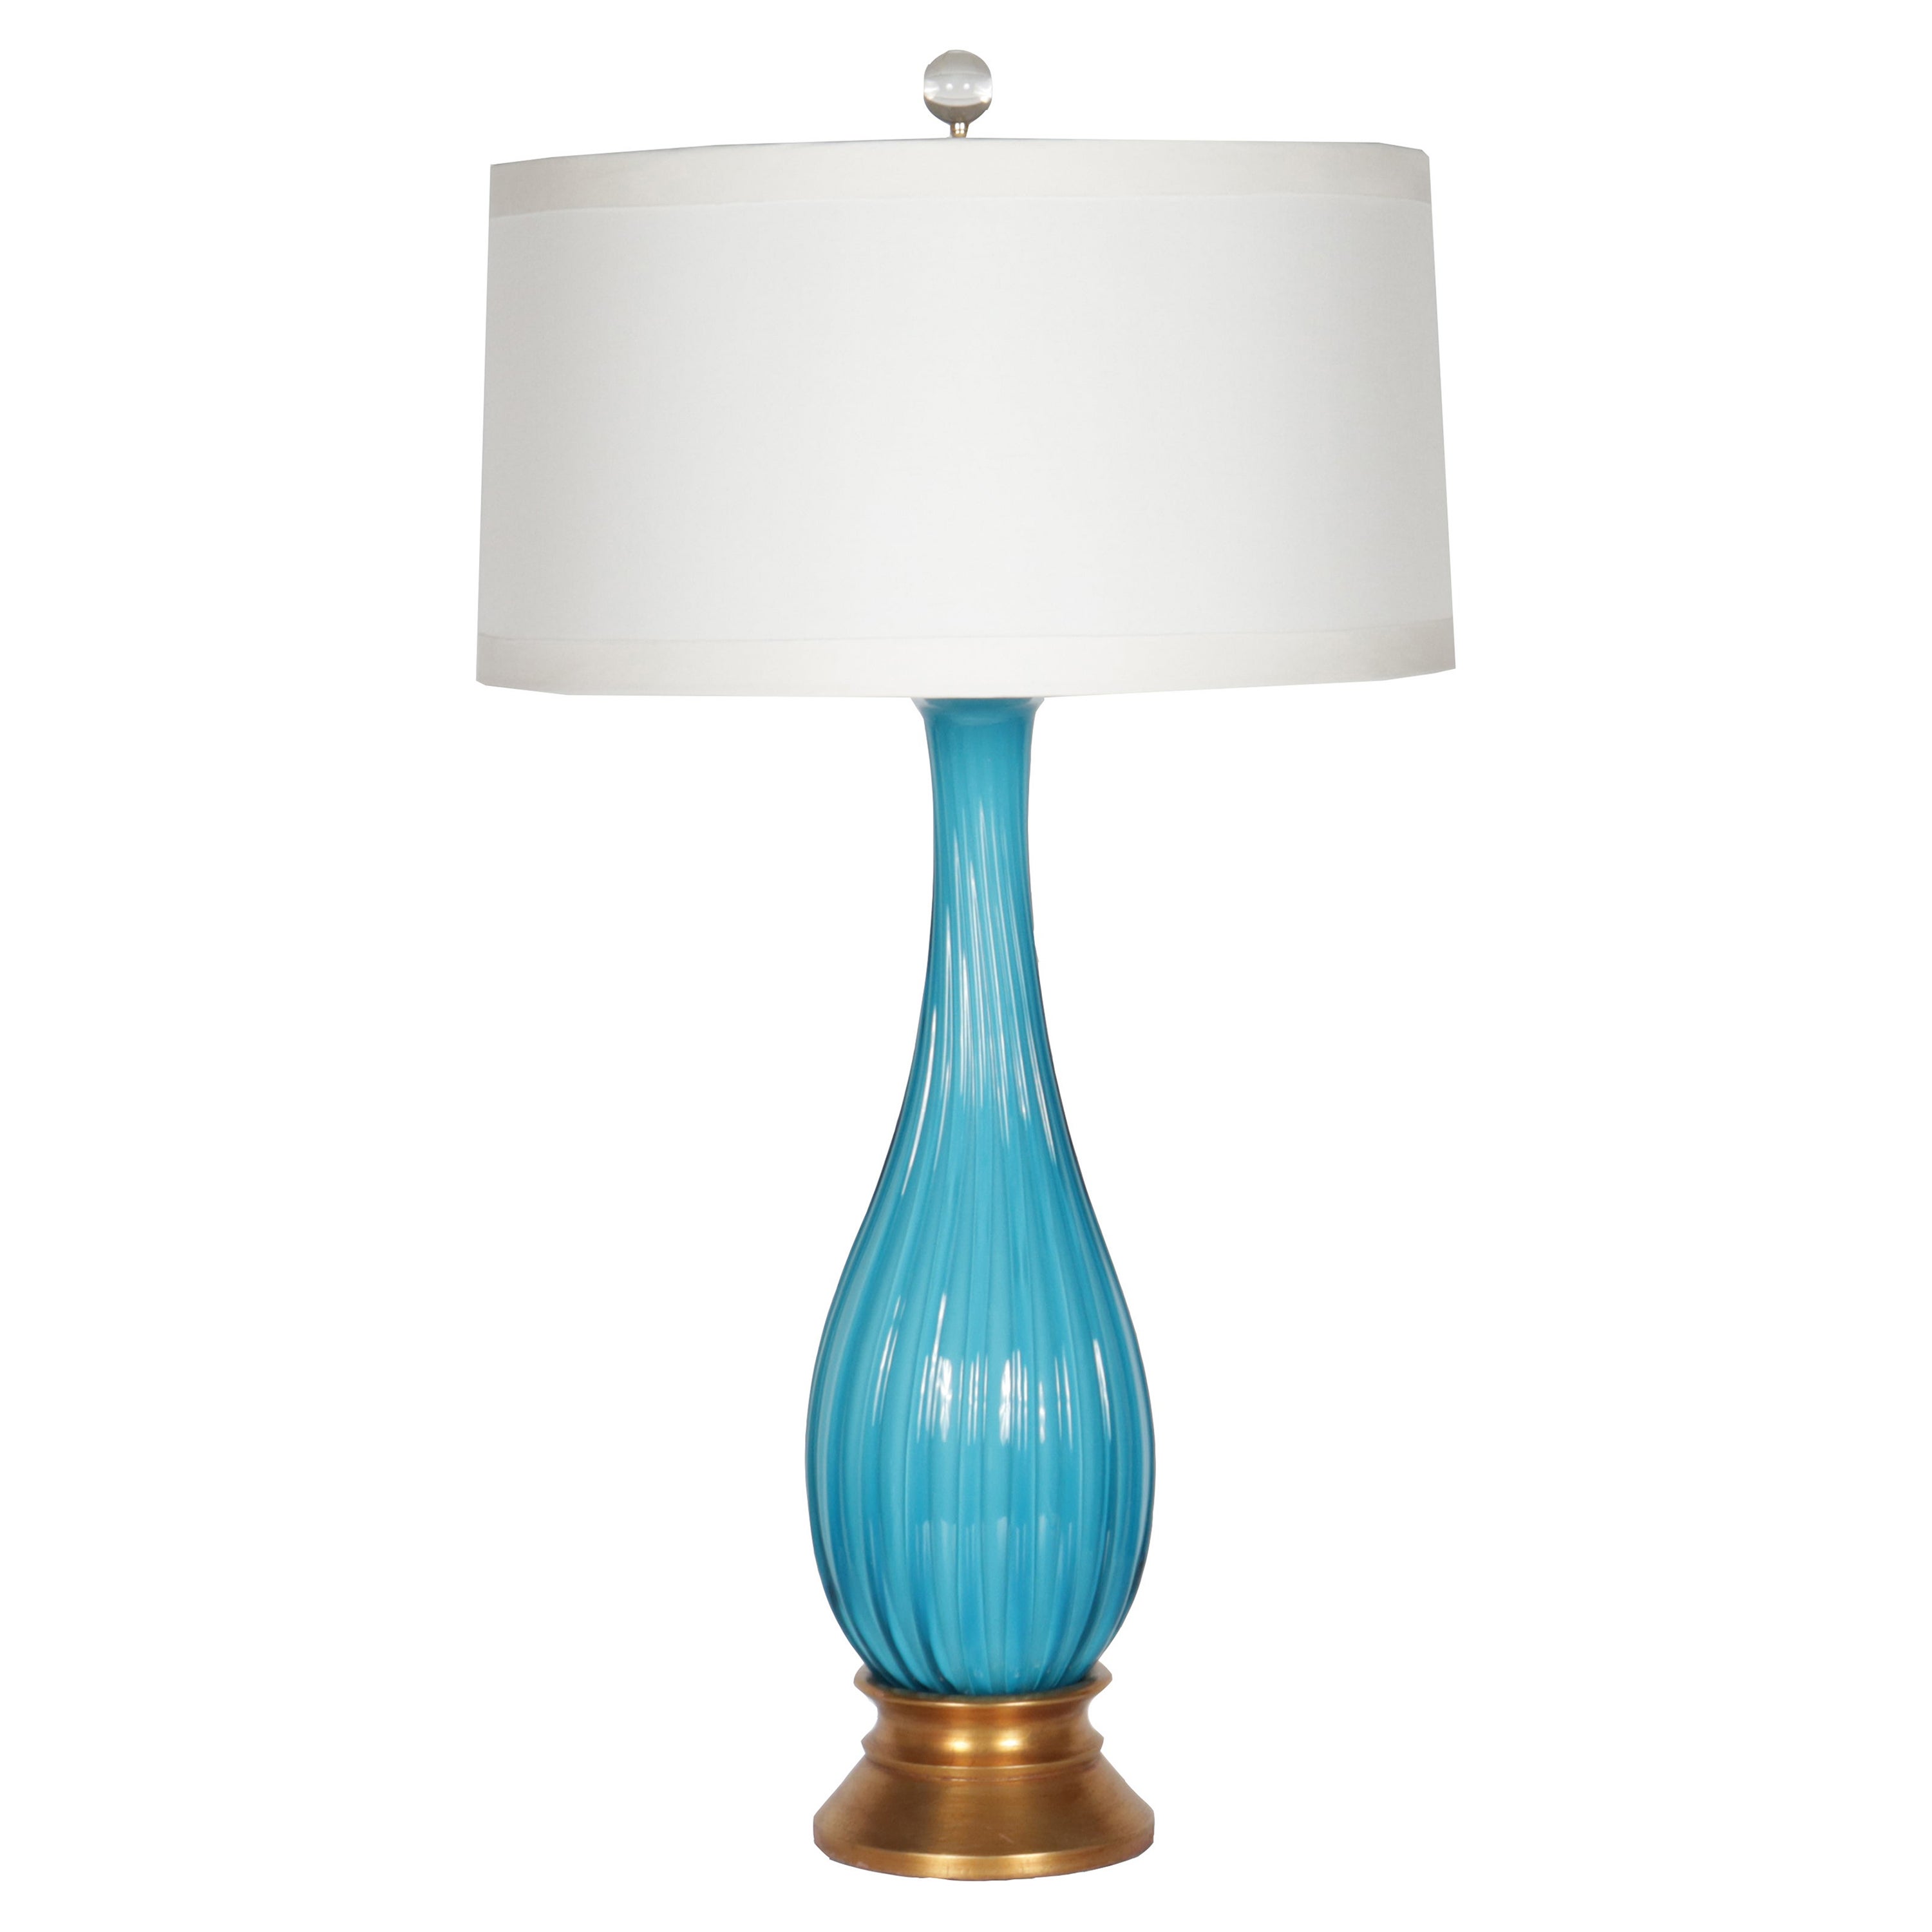 Blue Murano Glass Lamp Attributed to Hollywood Regency, c. 1950 For Sale